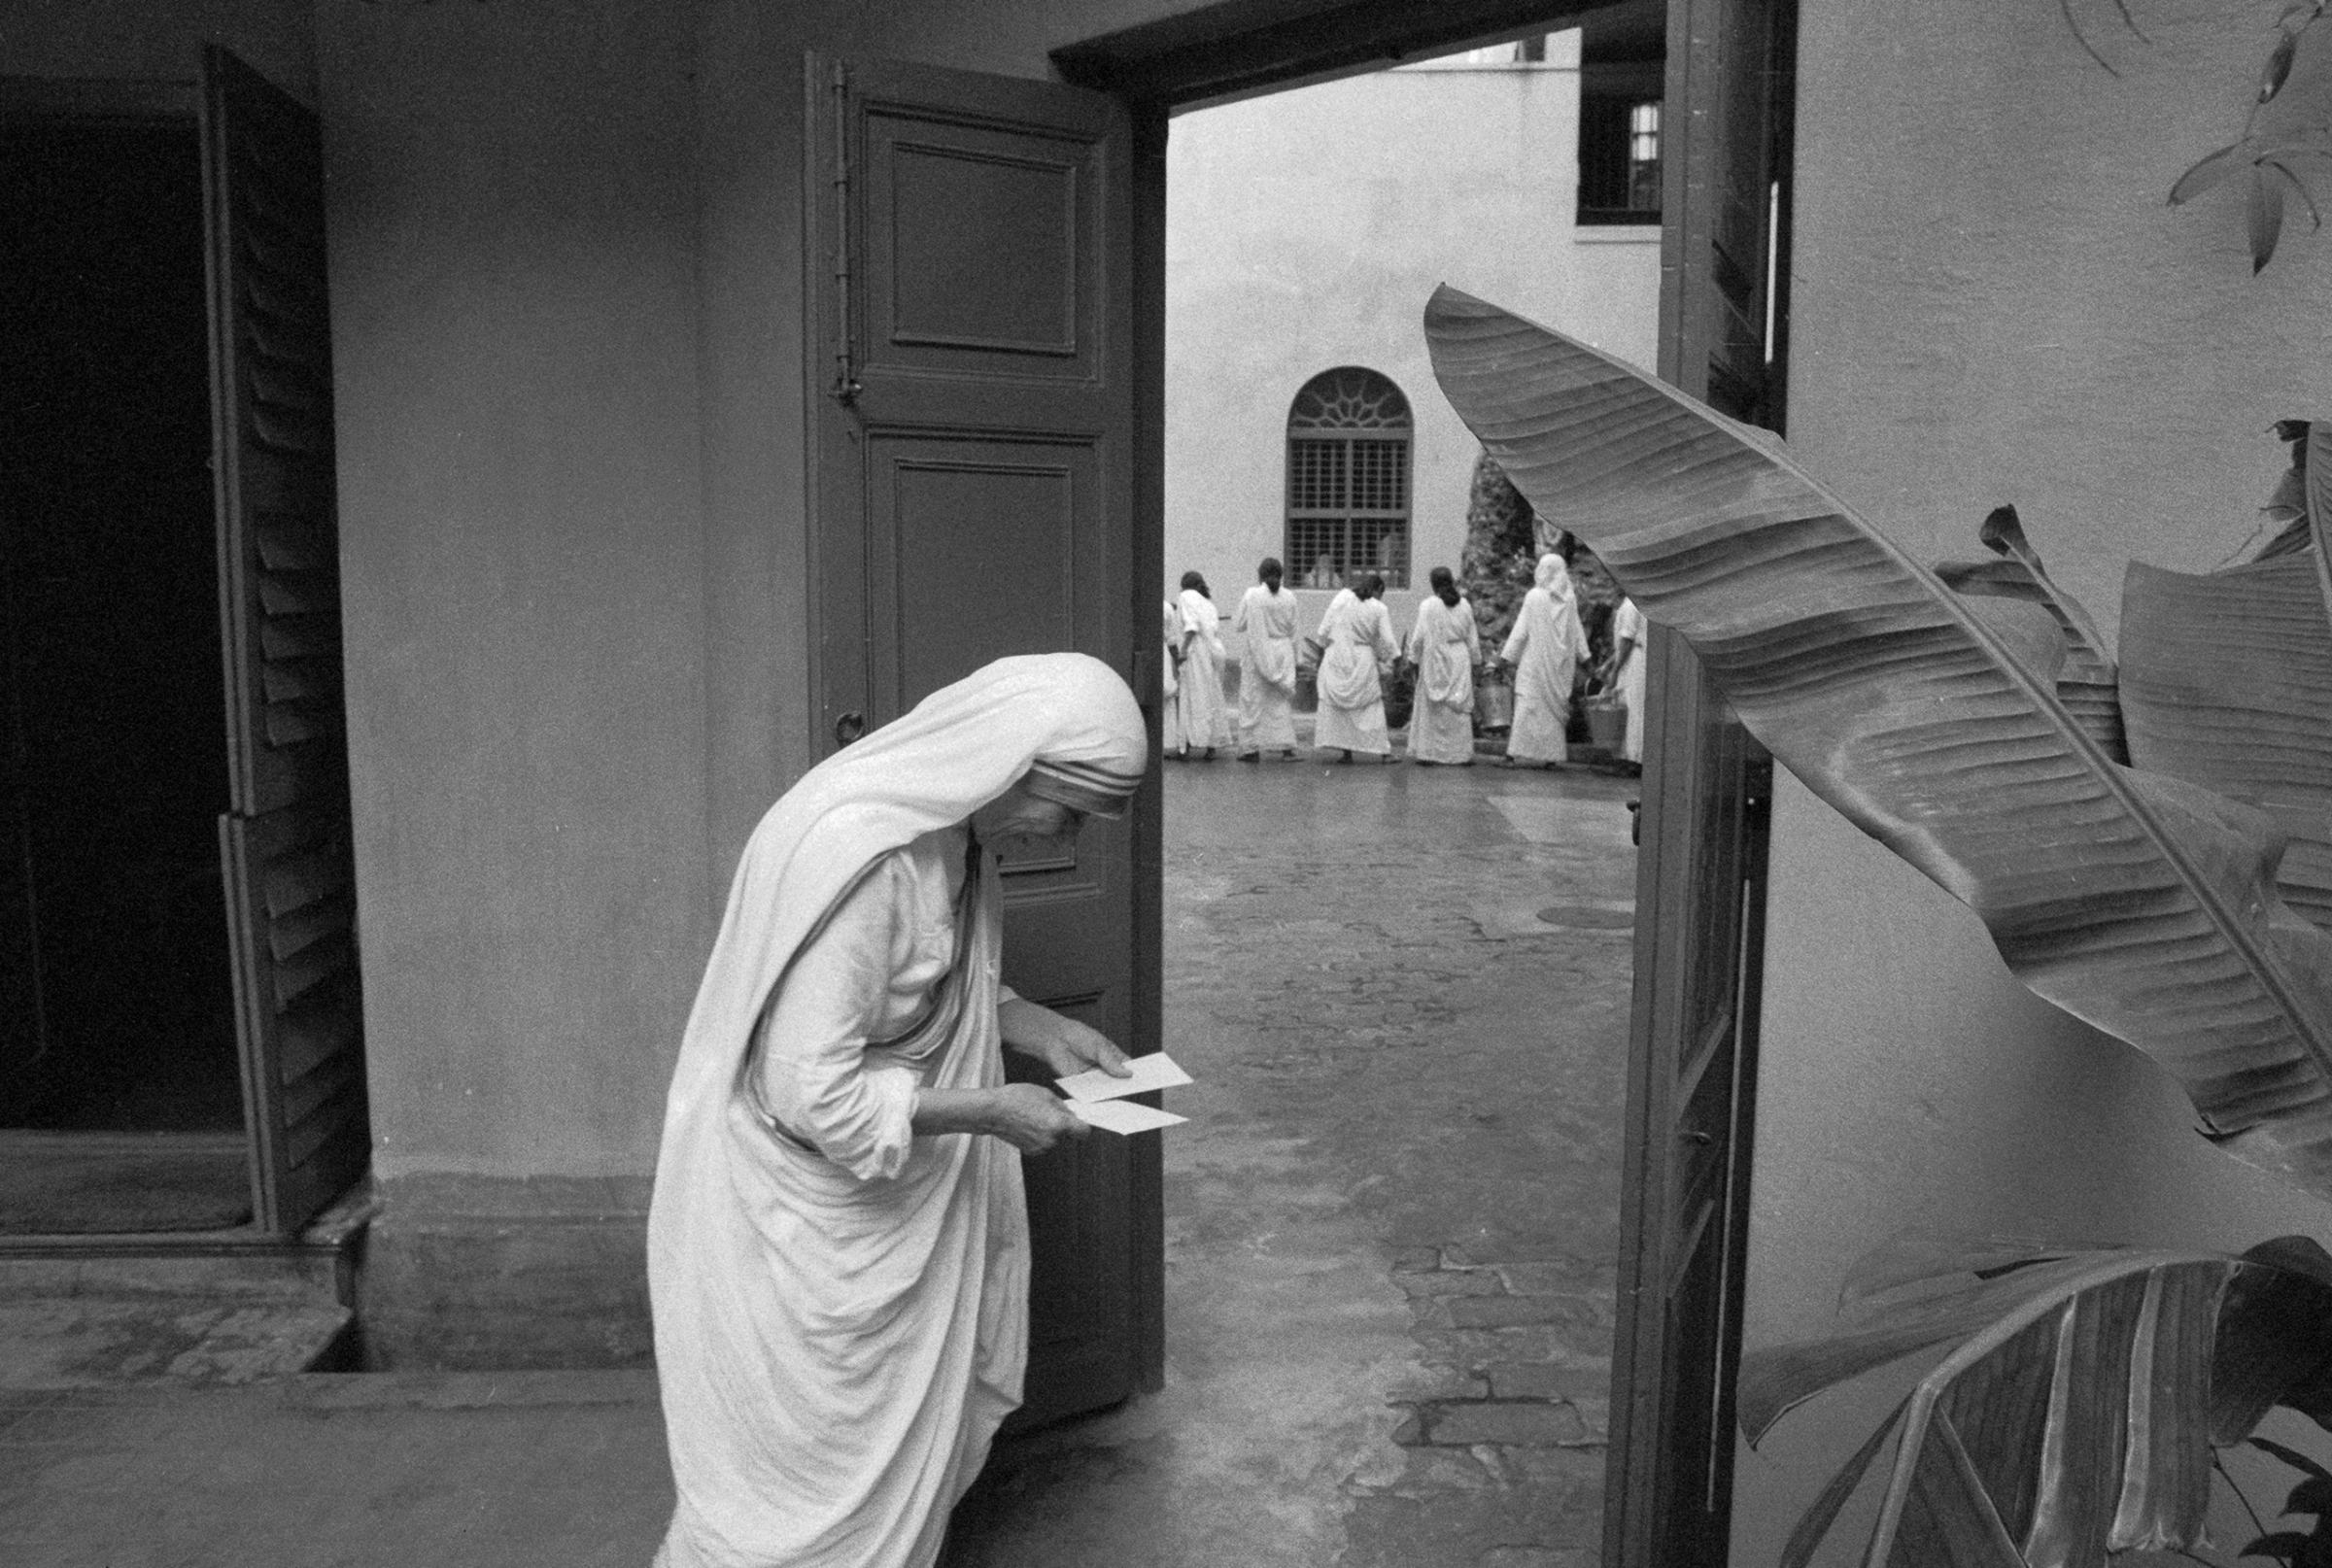 Mother Teresa takes a couple minutes to herself at a prayer hall before going about her daily rounds.